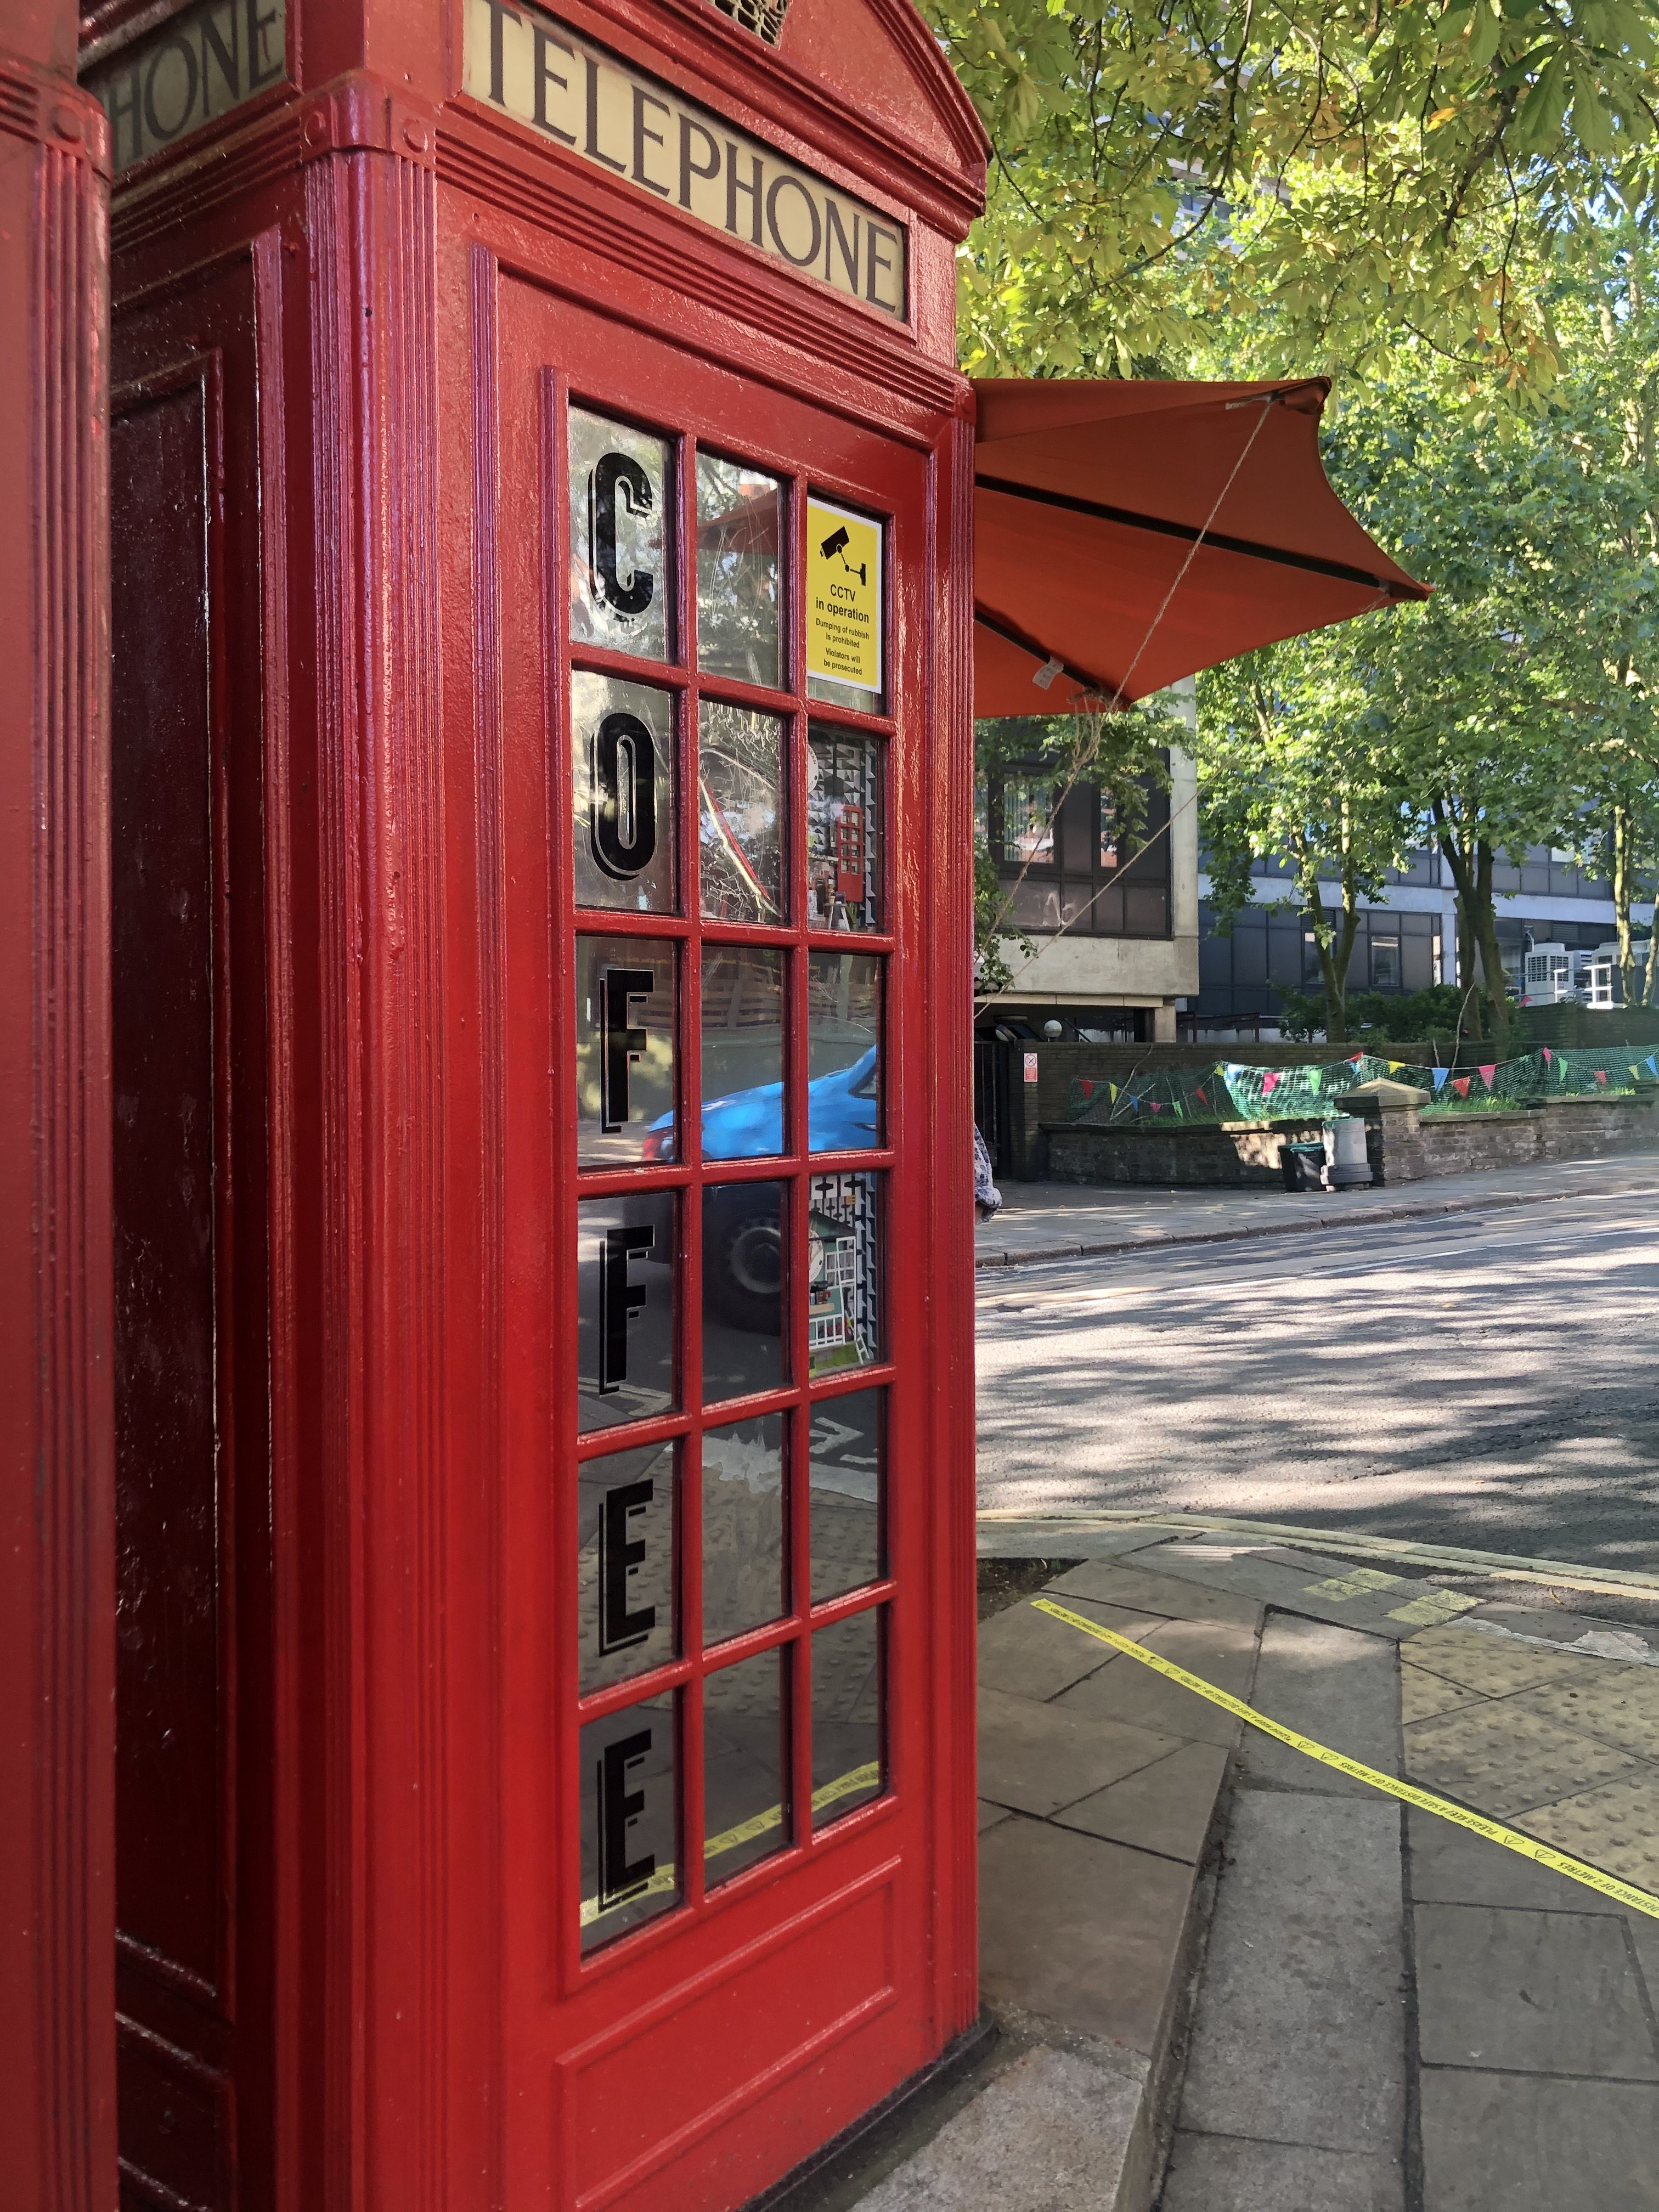 Fresh coffee from iconic red telephone box